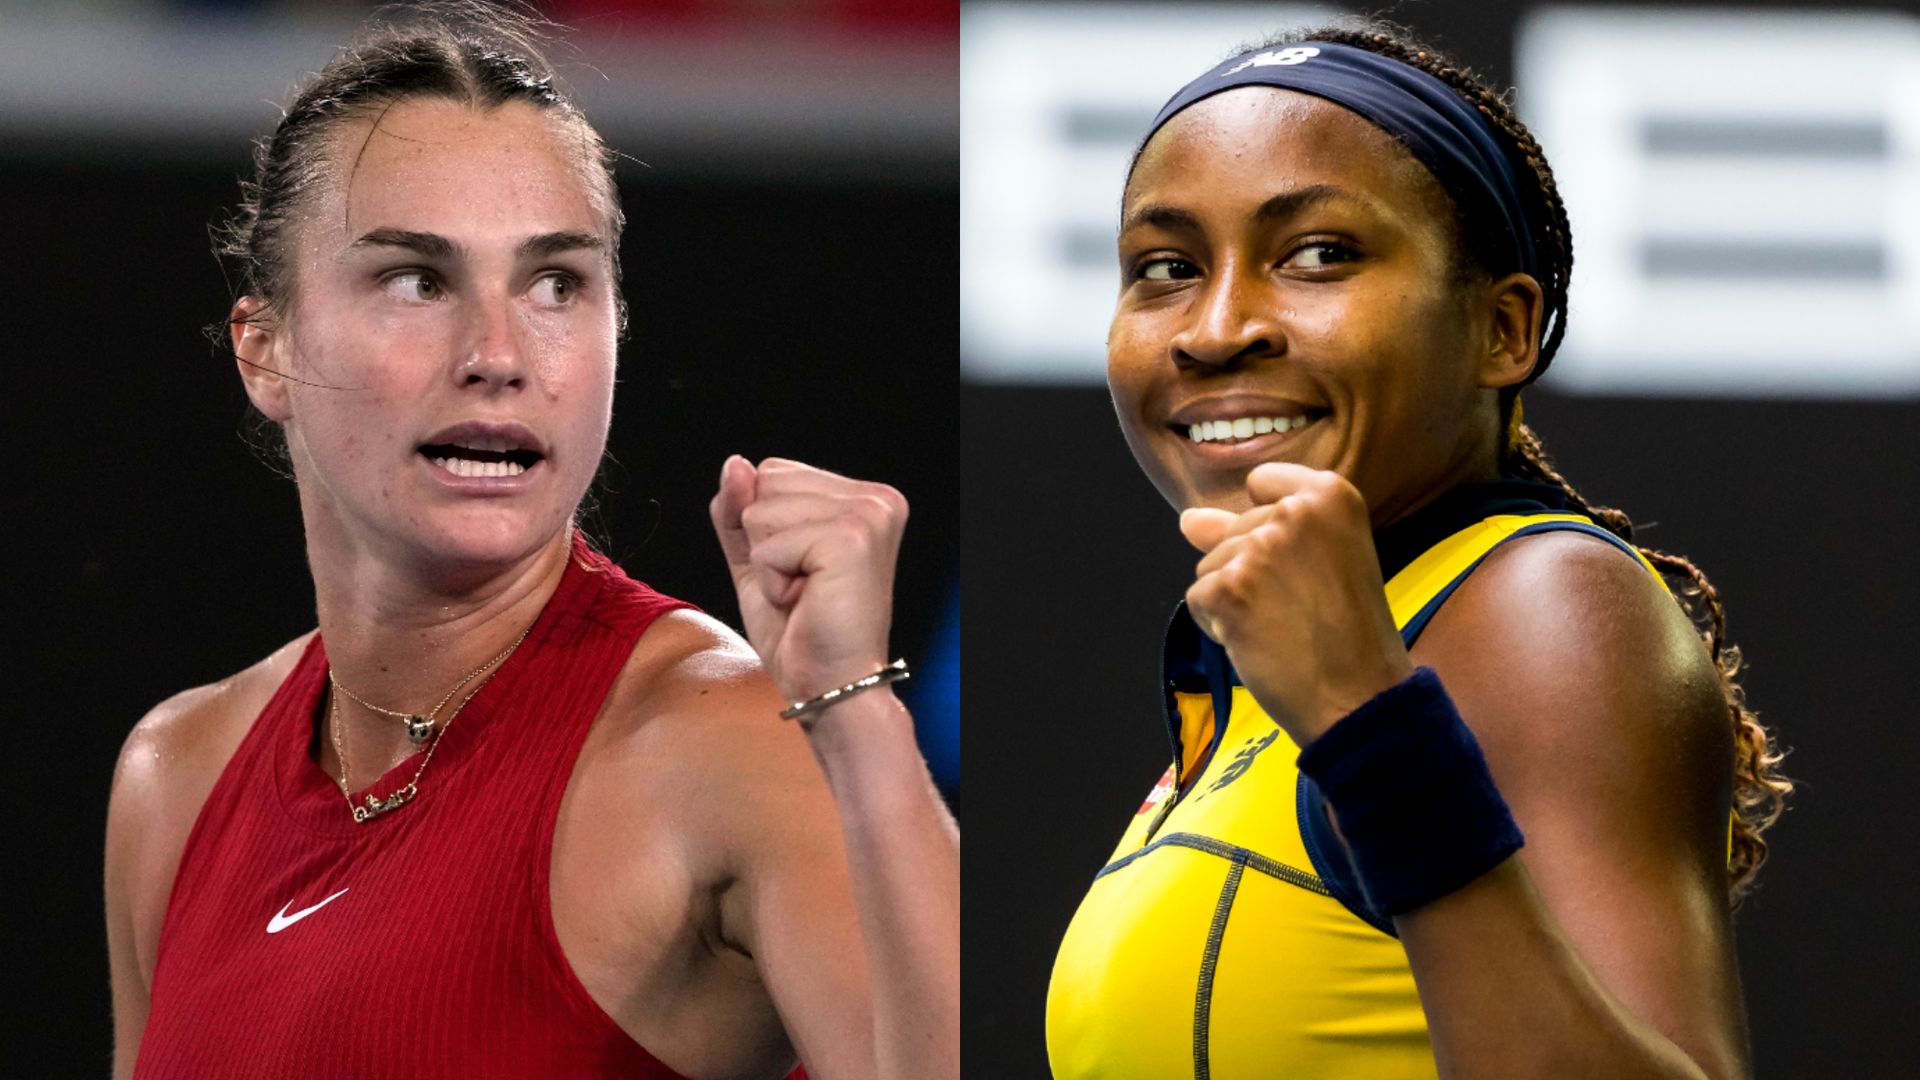 Sabalenka and Gauff in action at Indian Wells tonight on Sky